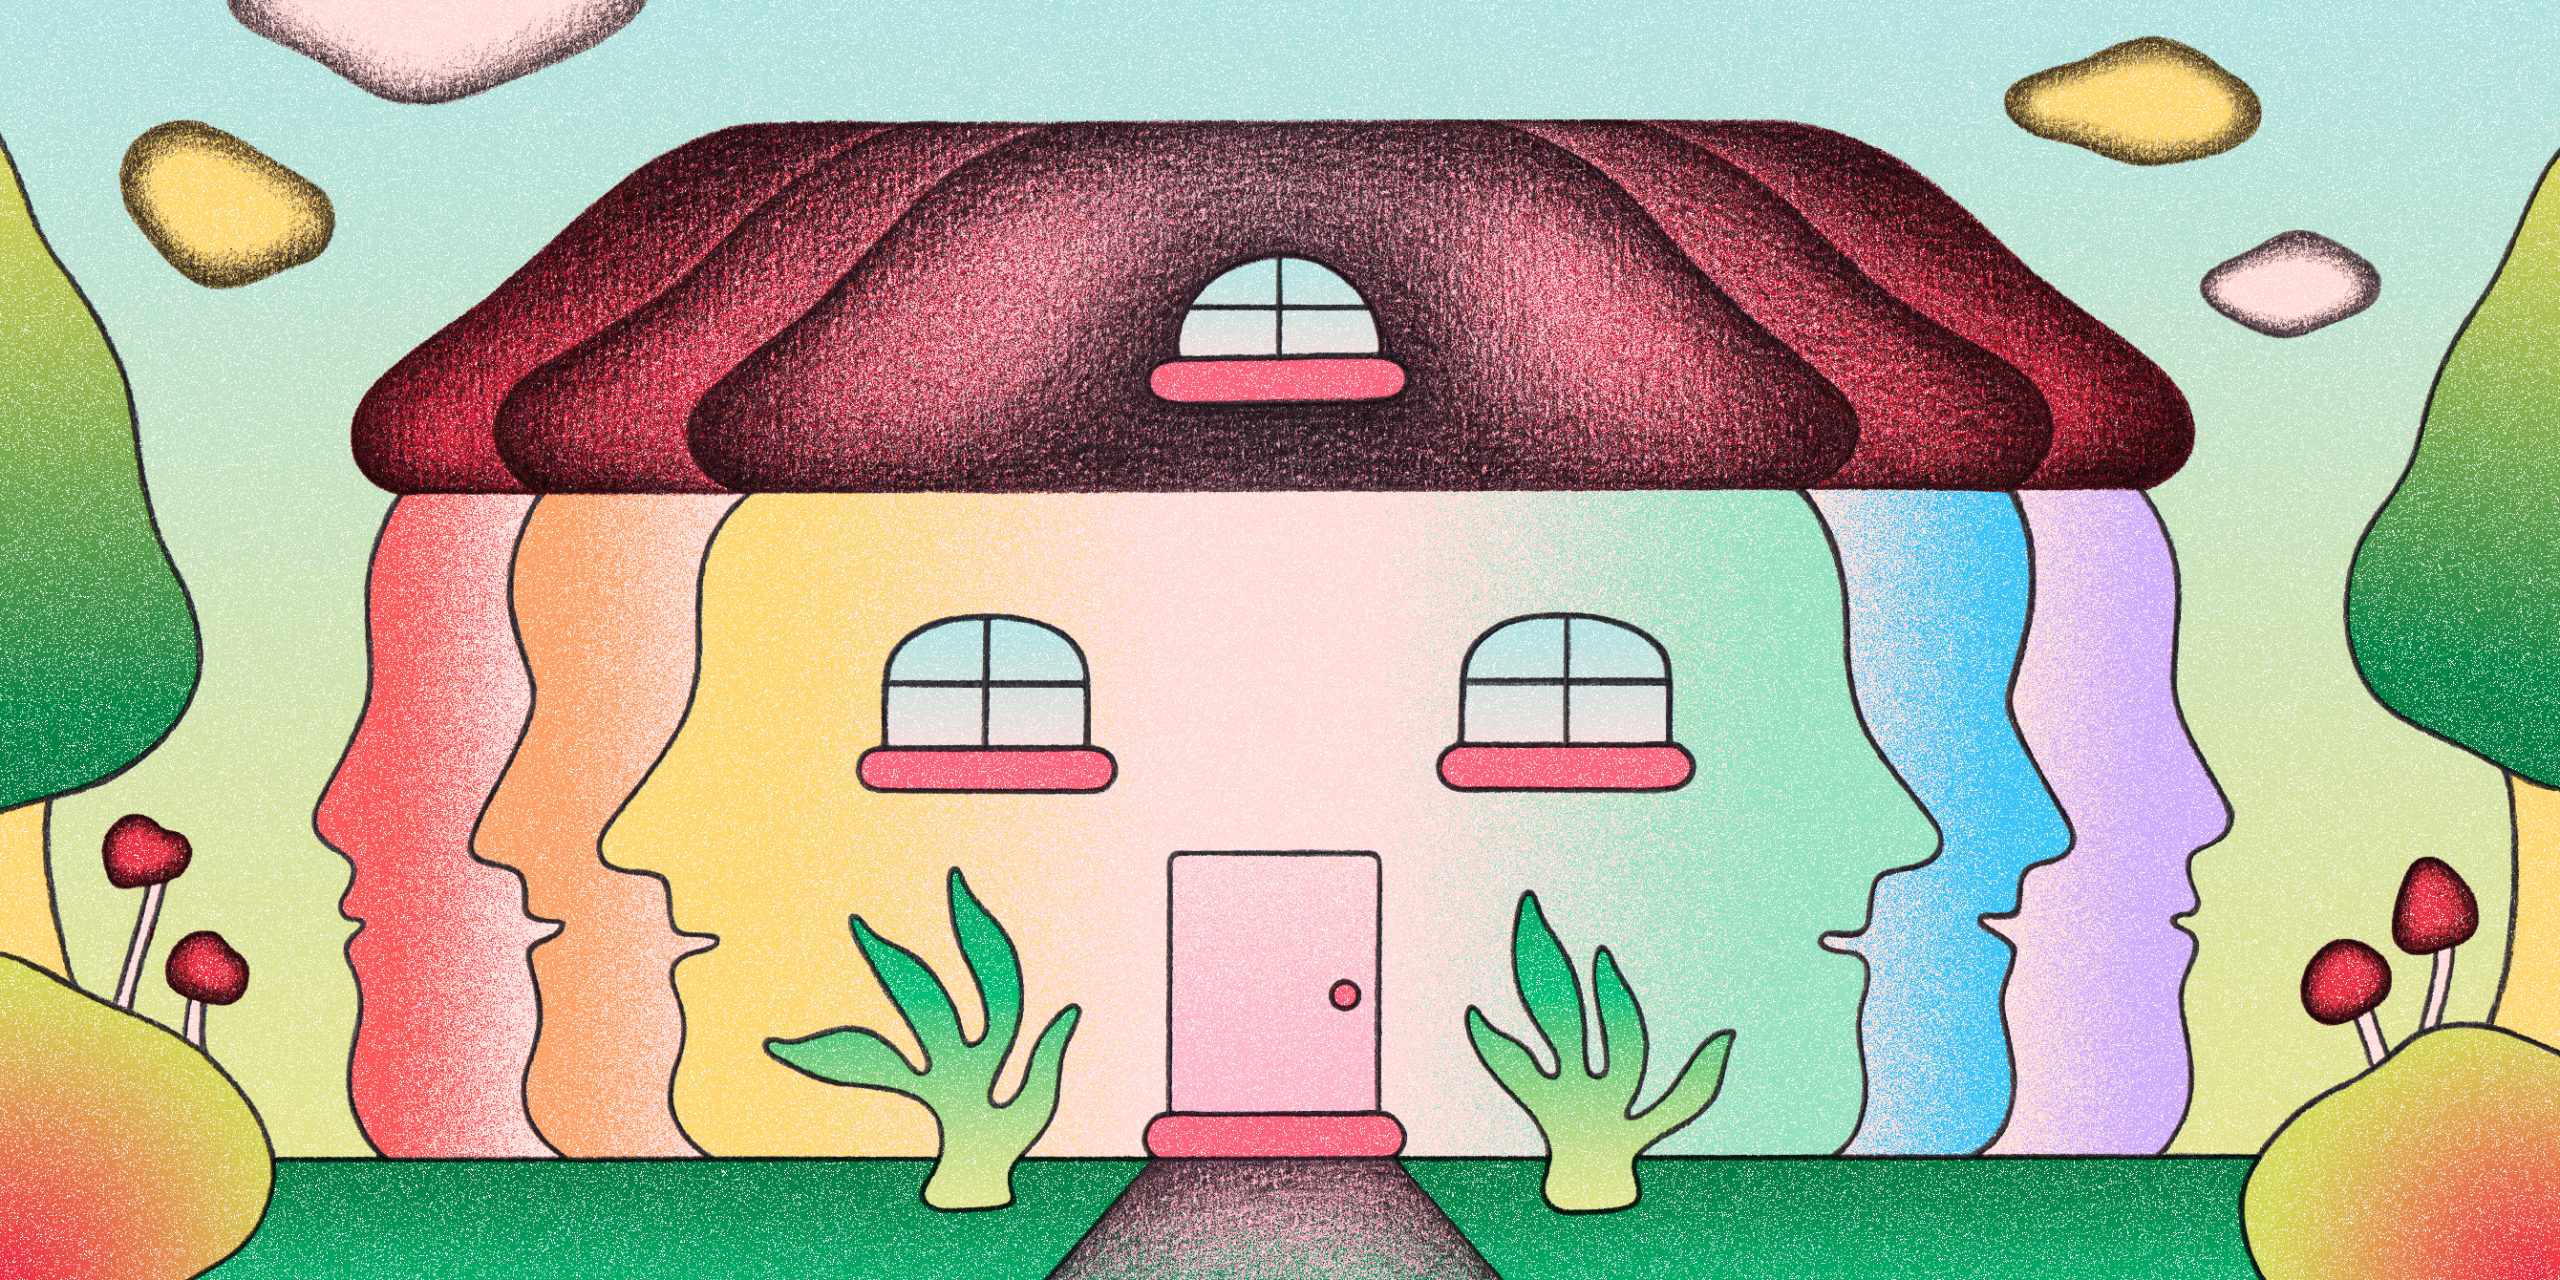 An illustration of a colorful house made up of a rainbow of faces.